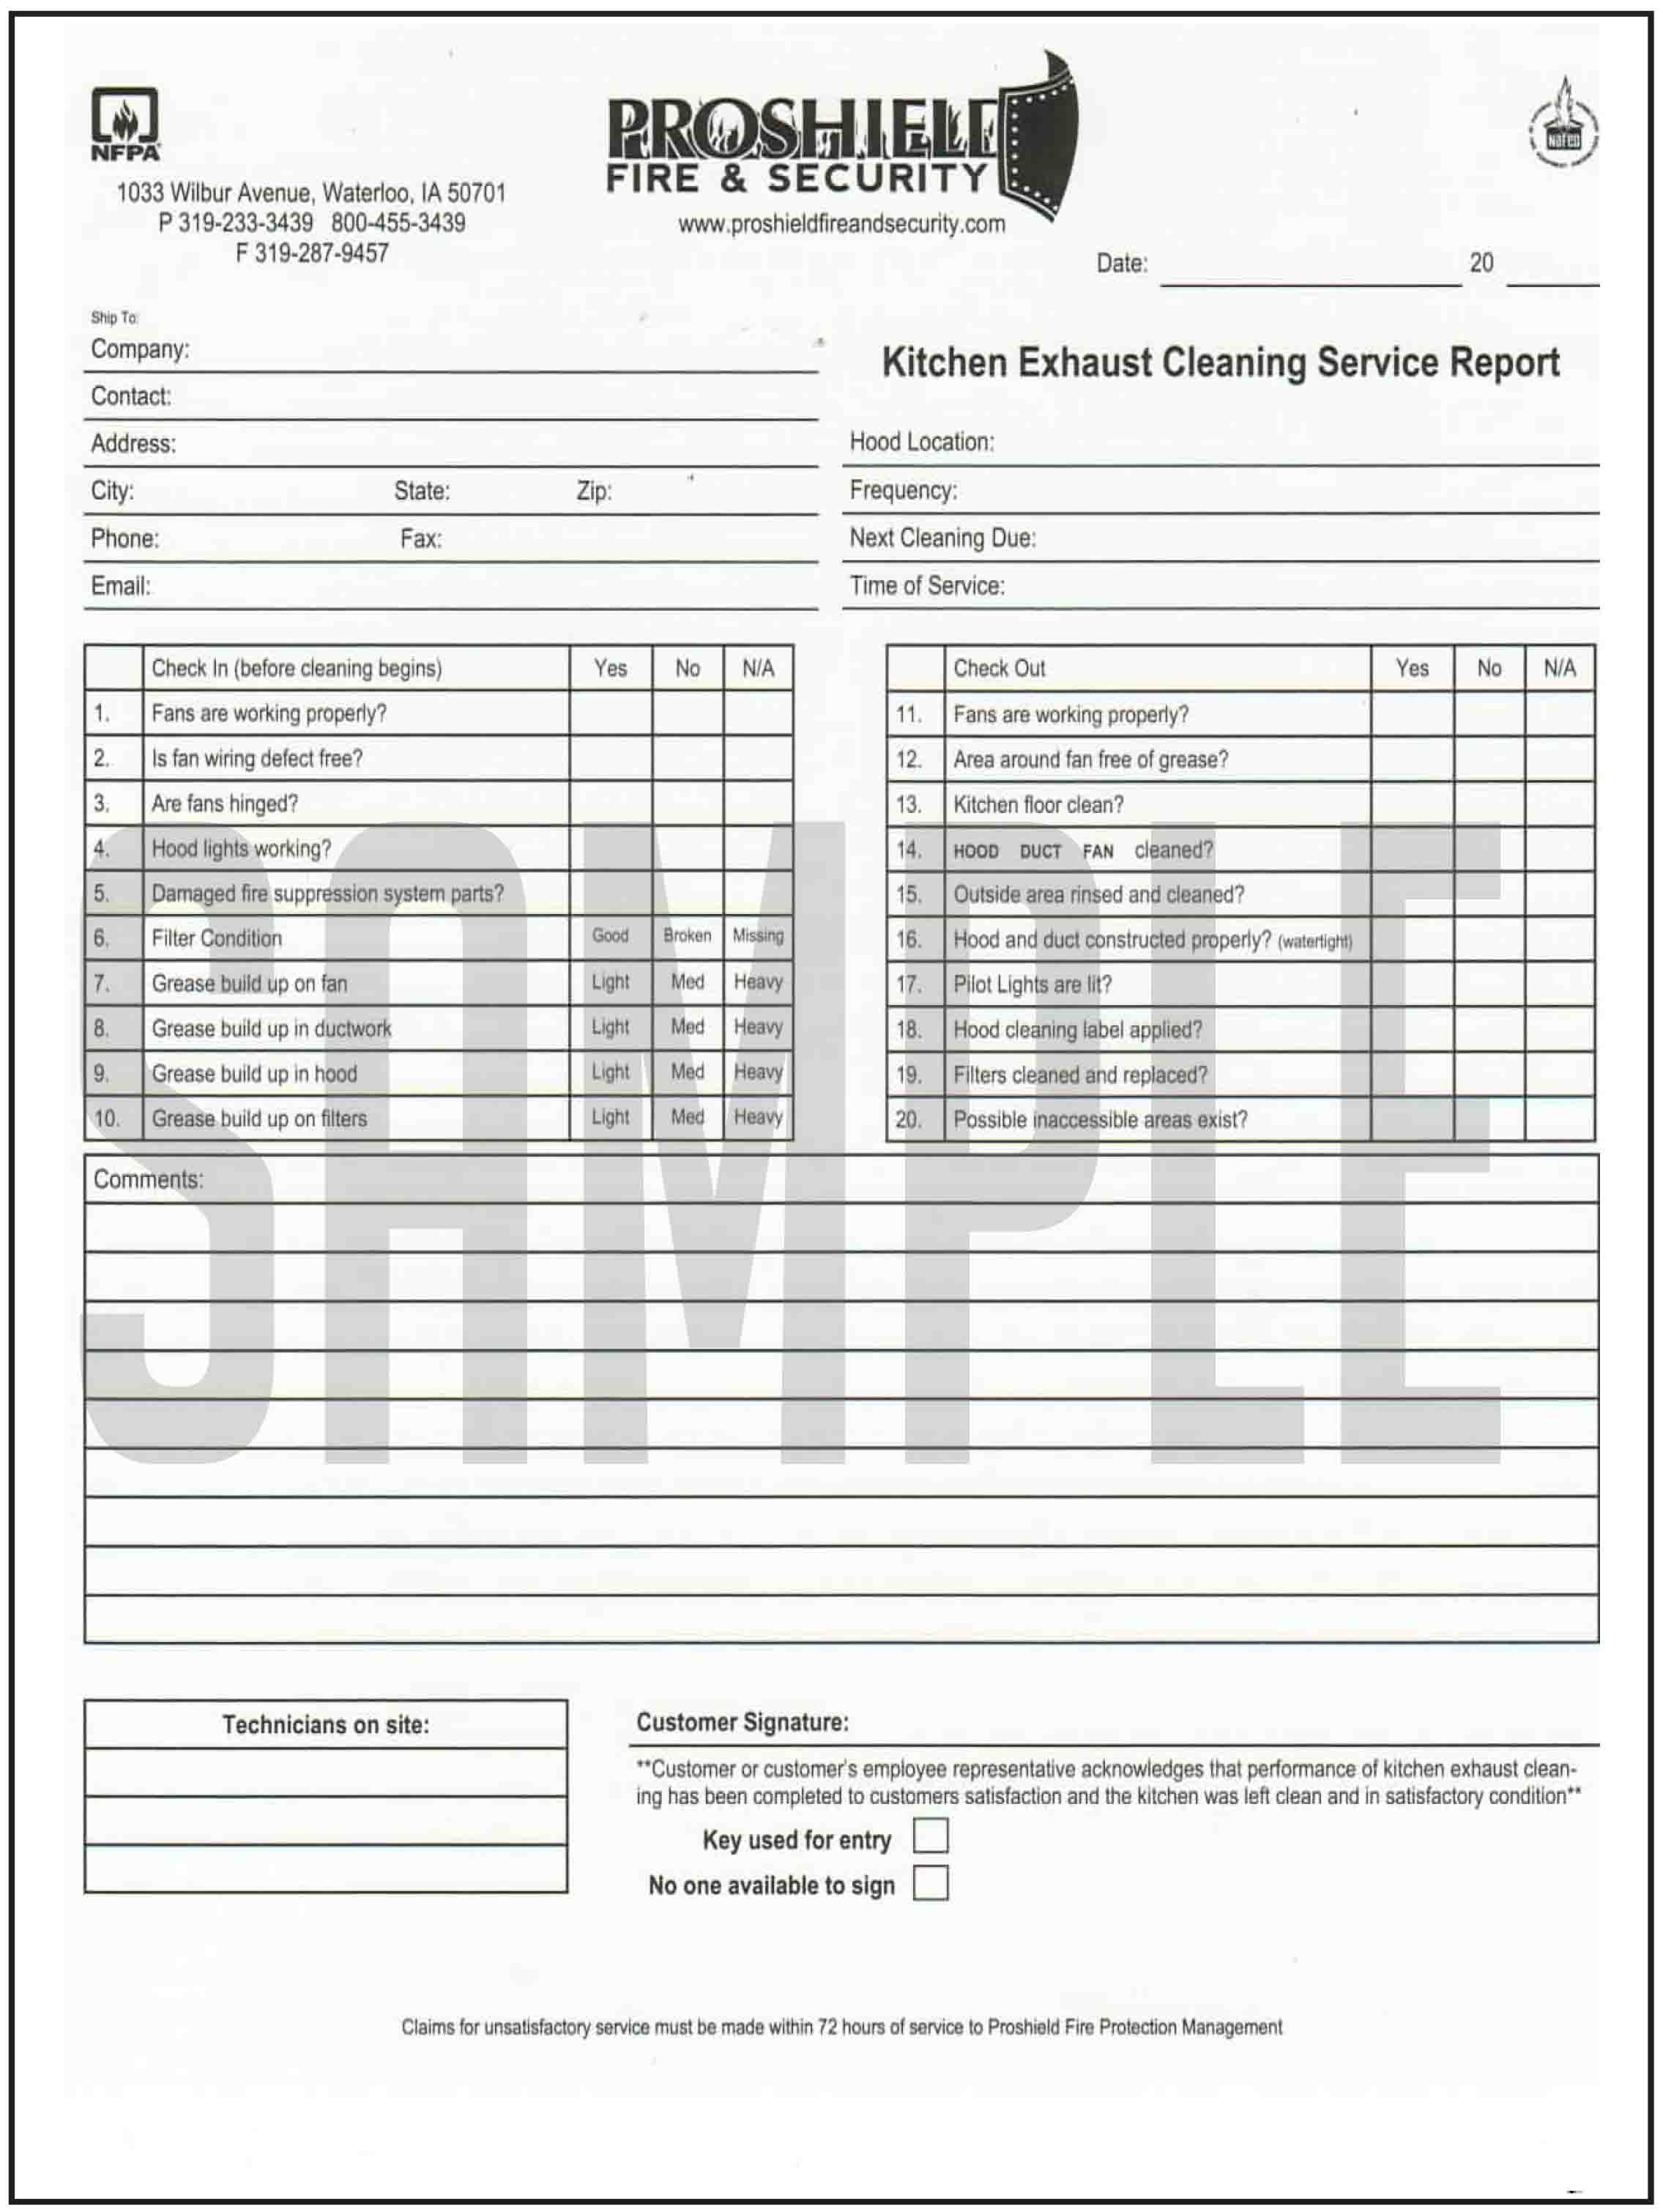 Fire Safety Inspection Report Sample | HSE Images & Videos ...